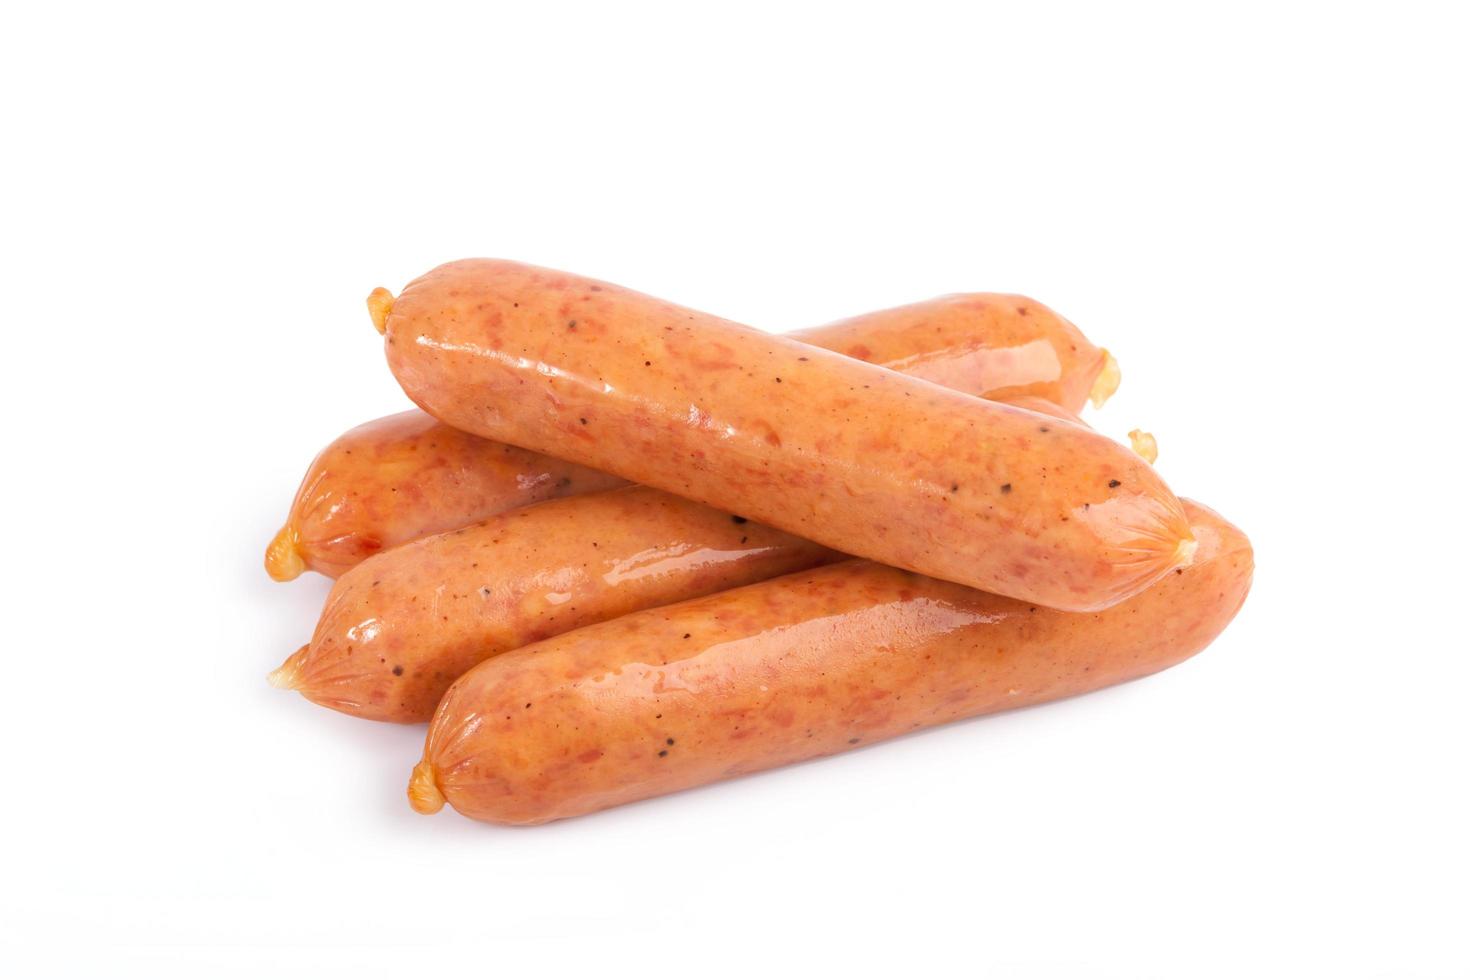 Sausages isolated on a white background photo